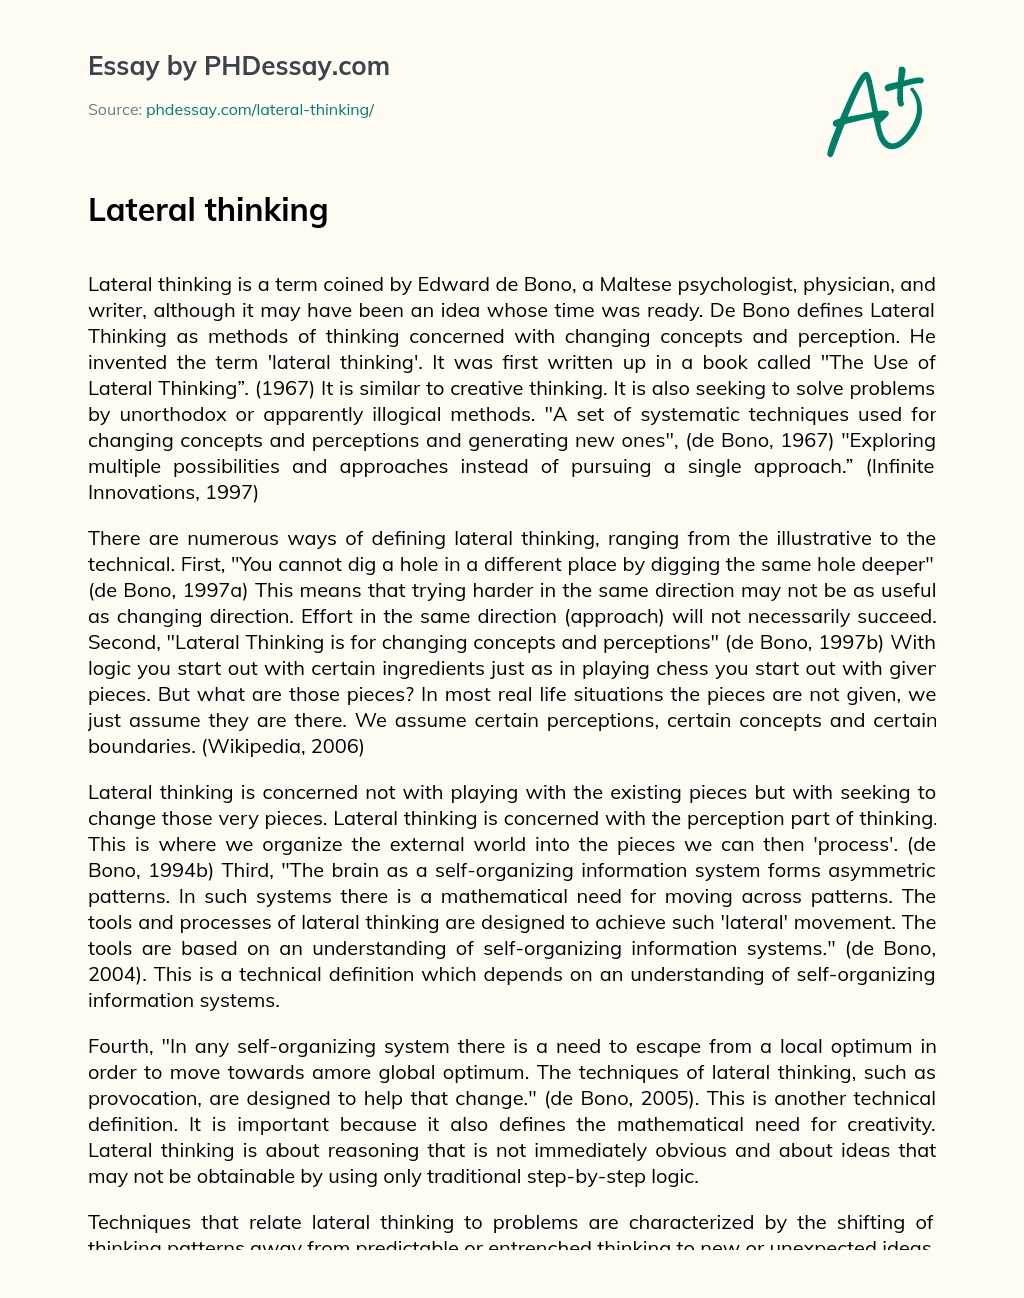 Lateral thinking essay